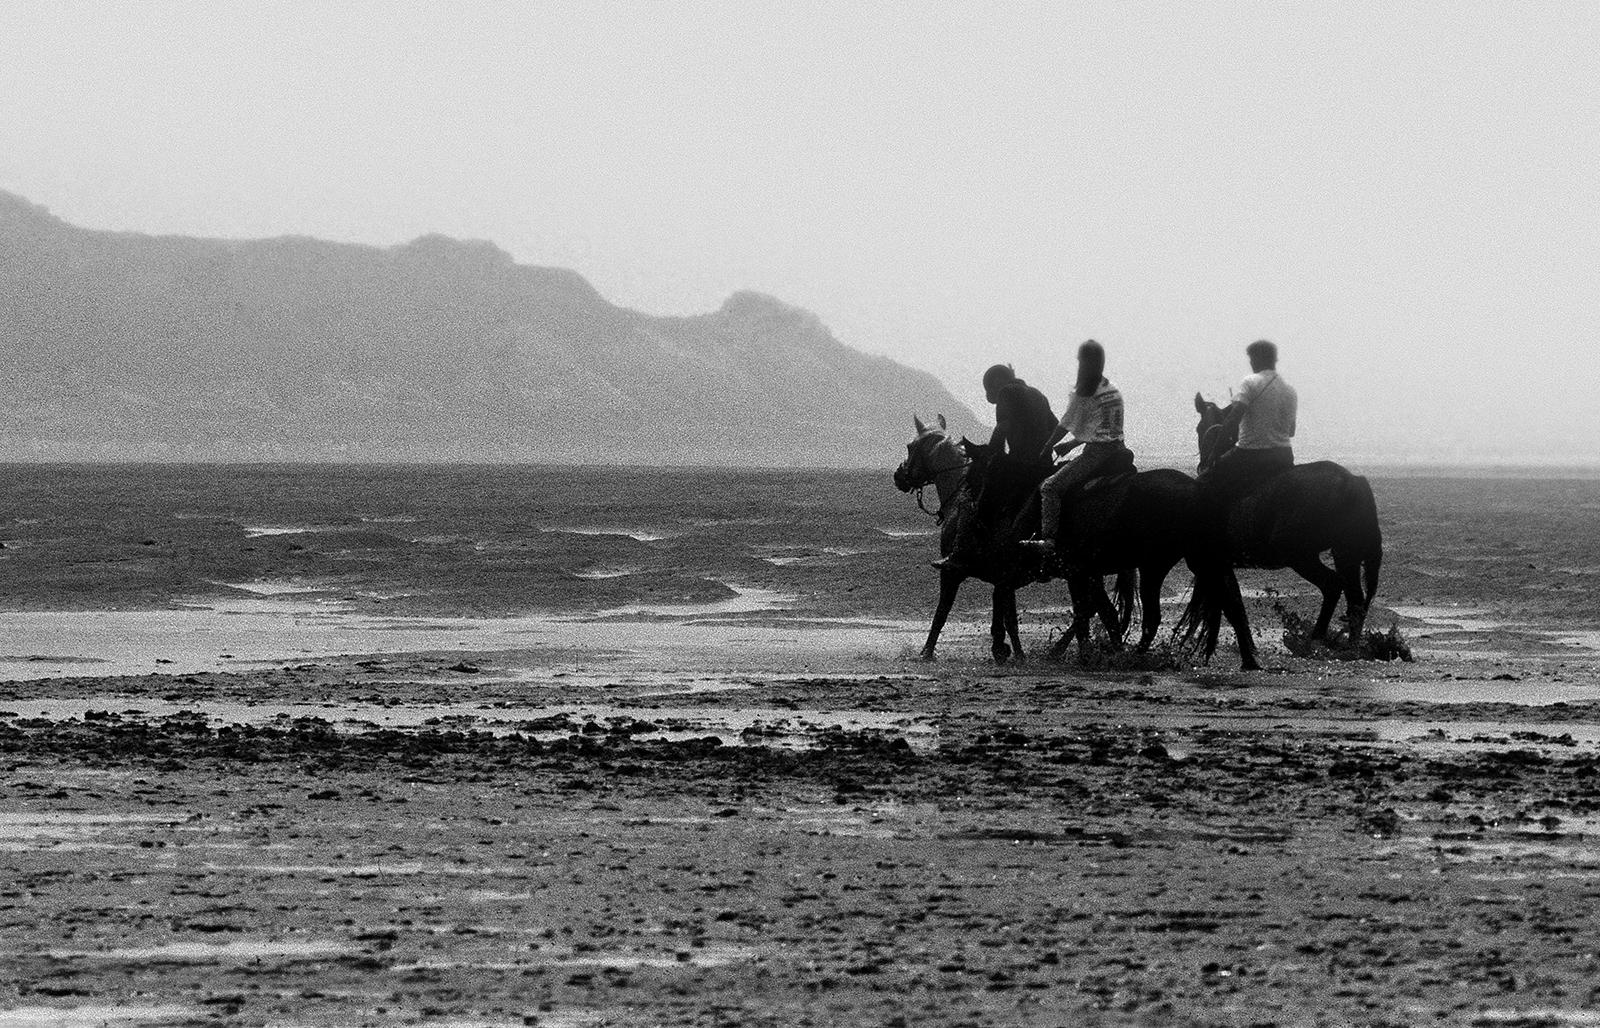 Horses - Signed limited edition nature print, Black and white photo, Landscape - Contemporary Photograph by Ian Sanderson